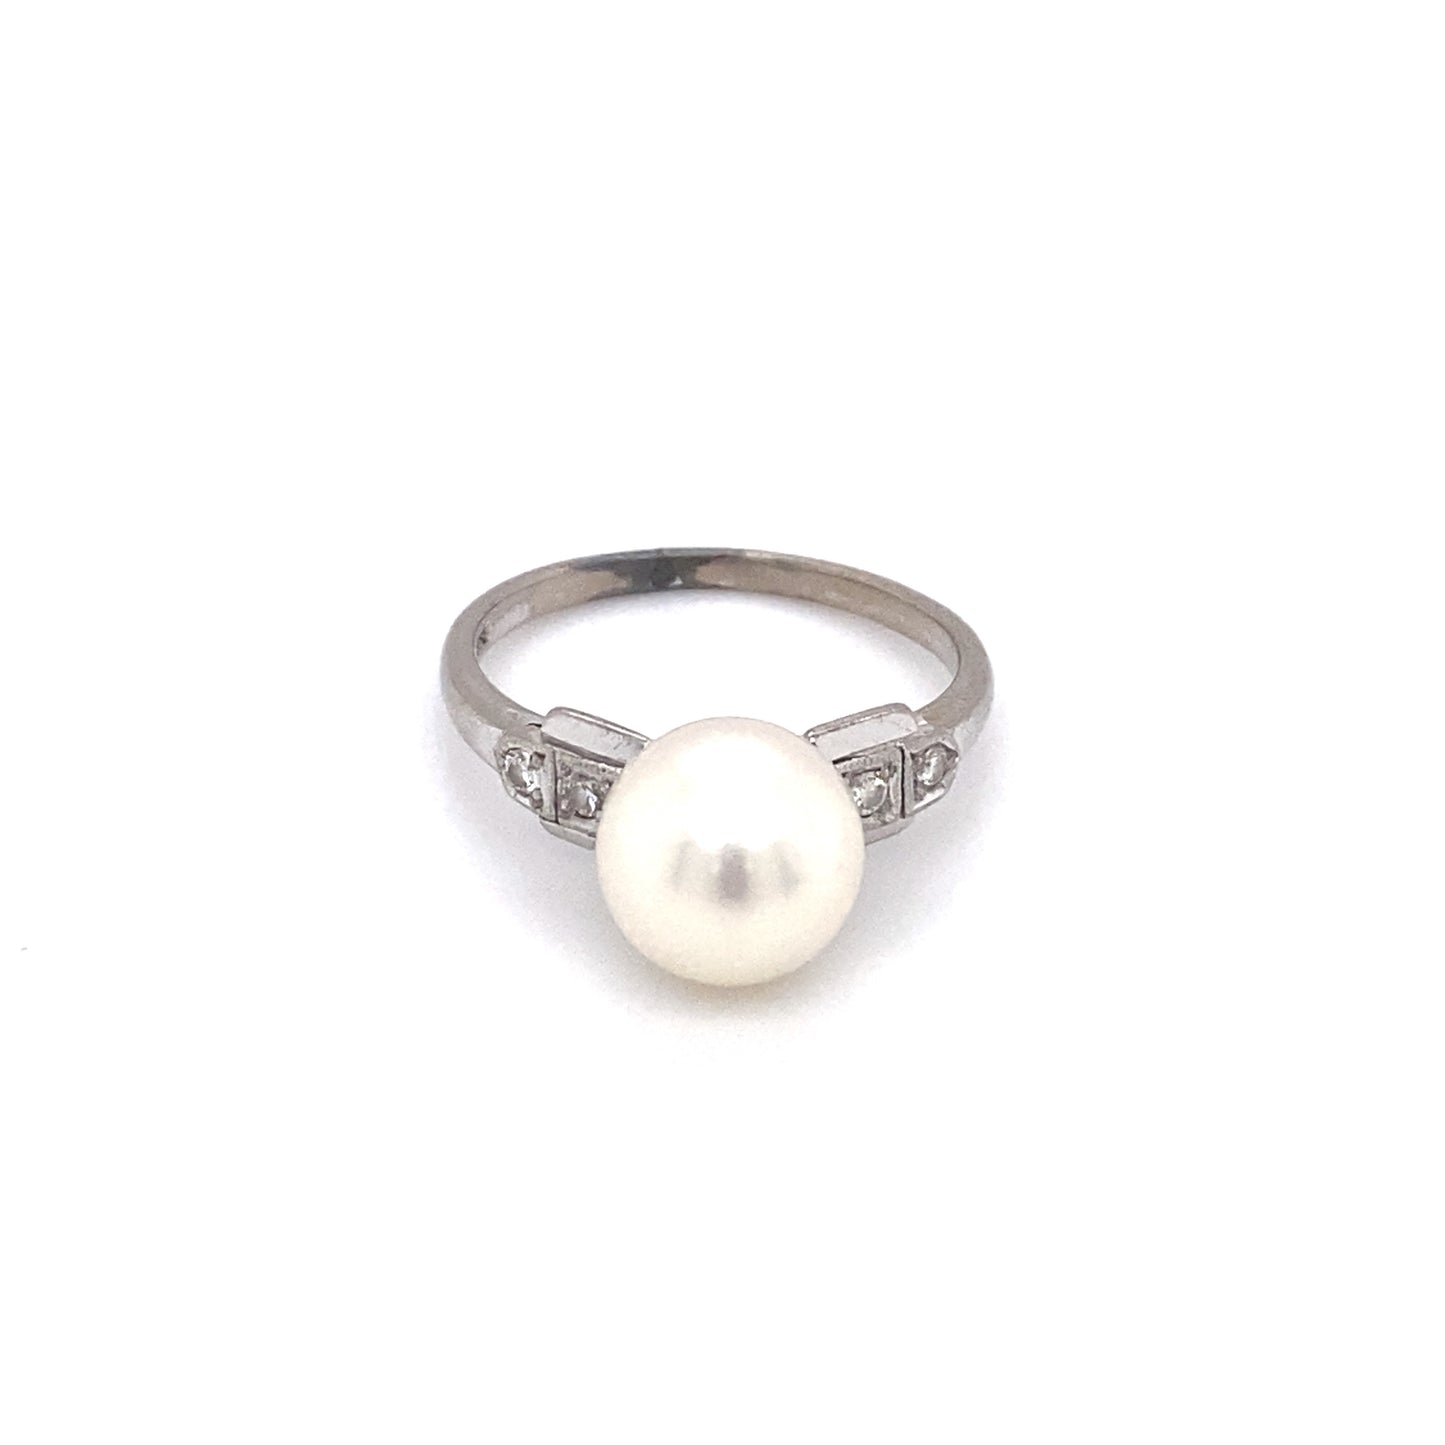 Circa 1940s Mikimoto 8.5mm Pearl and Diamond Ring in 14K White Gold